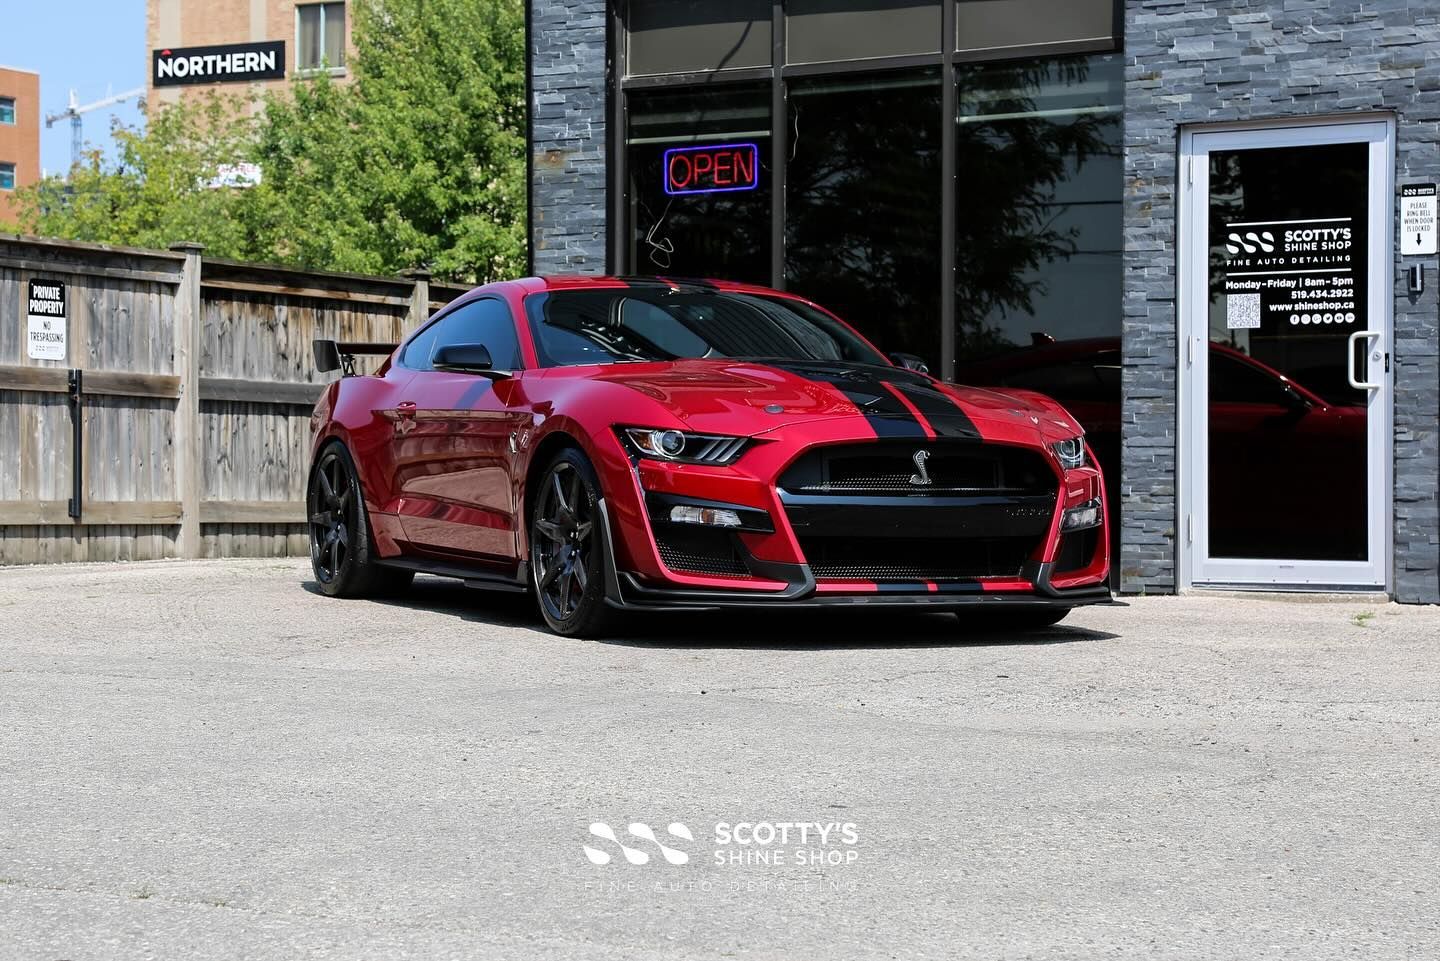 This stunning Ford Mustang GT500 has the full compliment of Xpel Ultimate Plus paint protection film